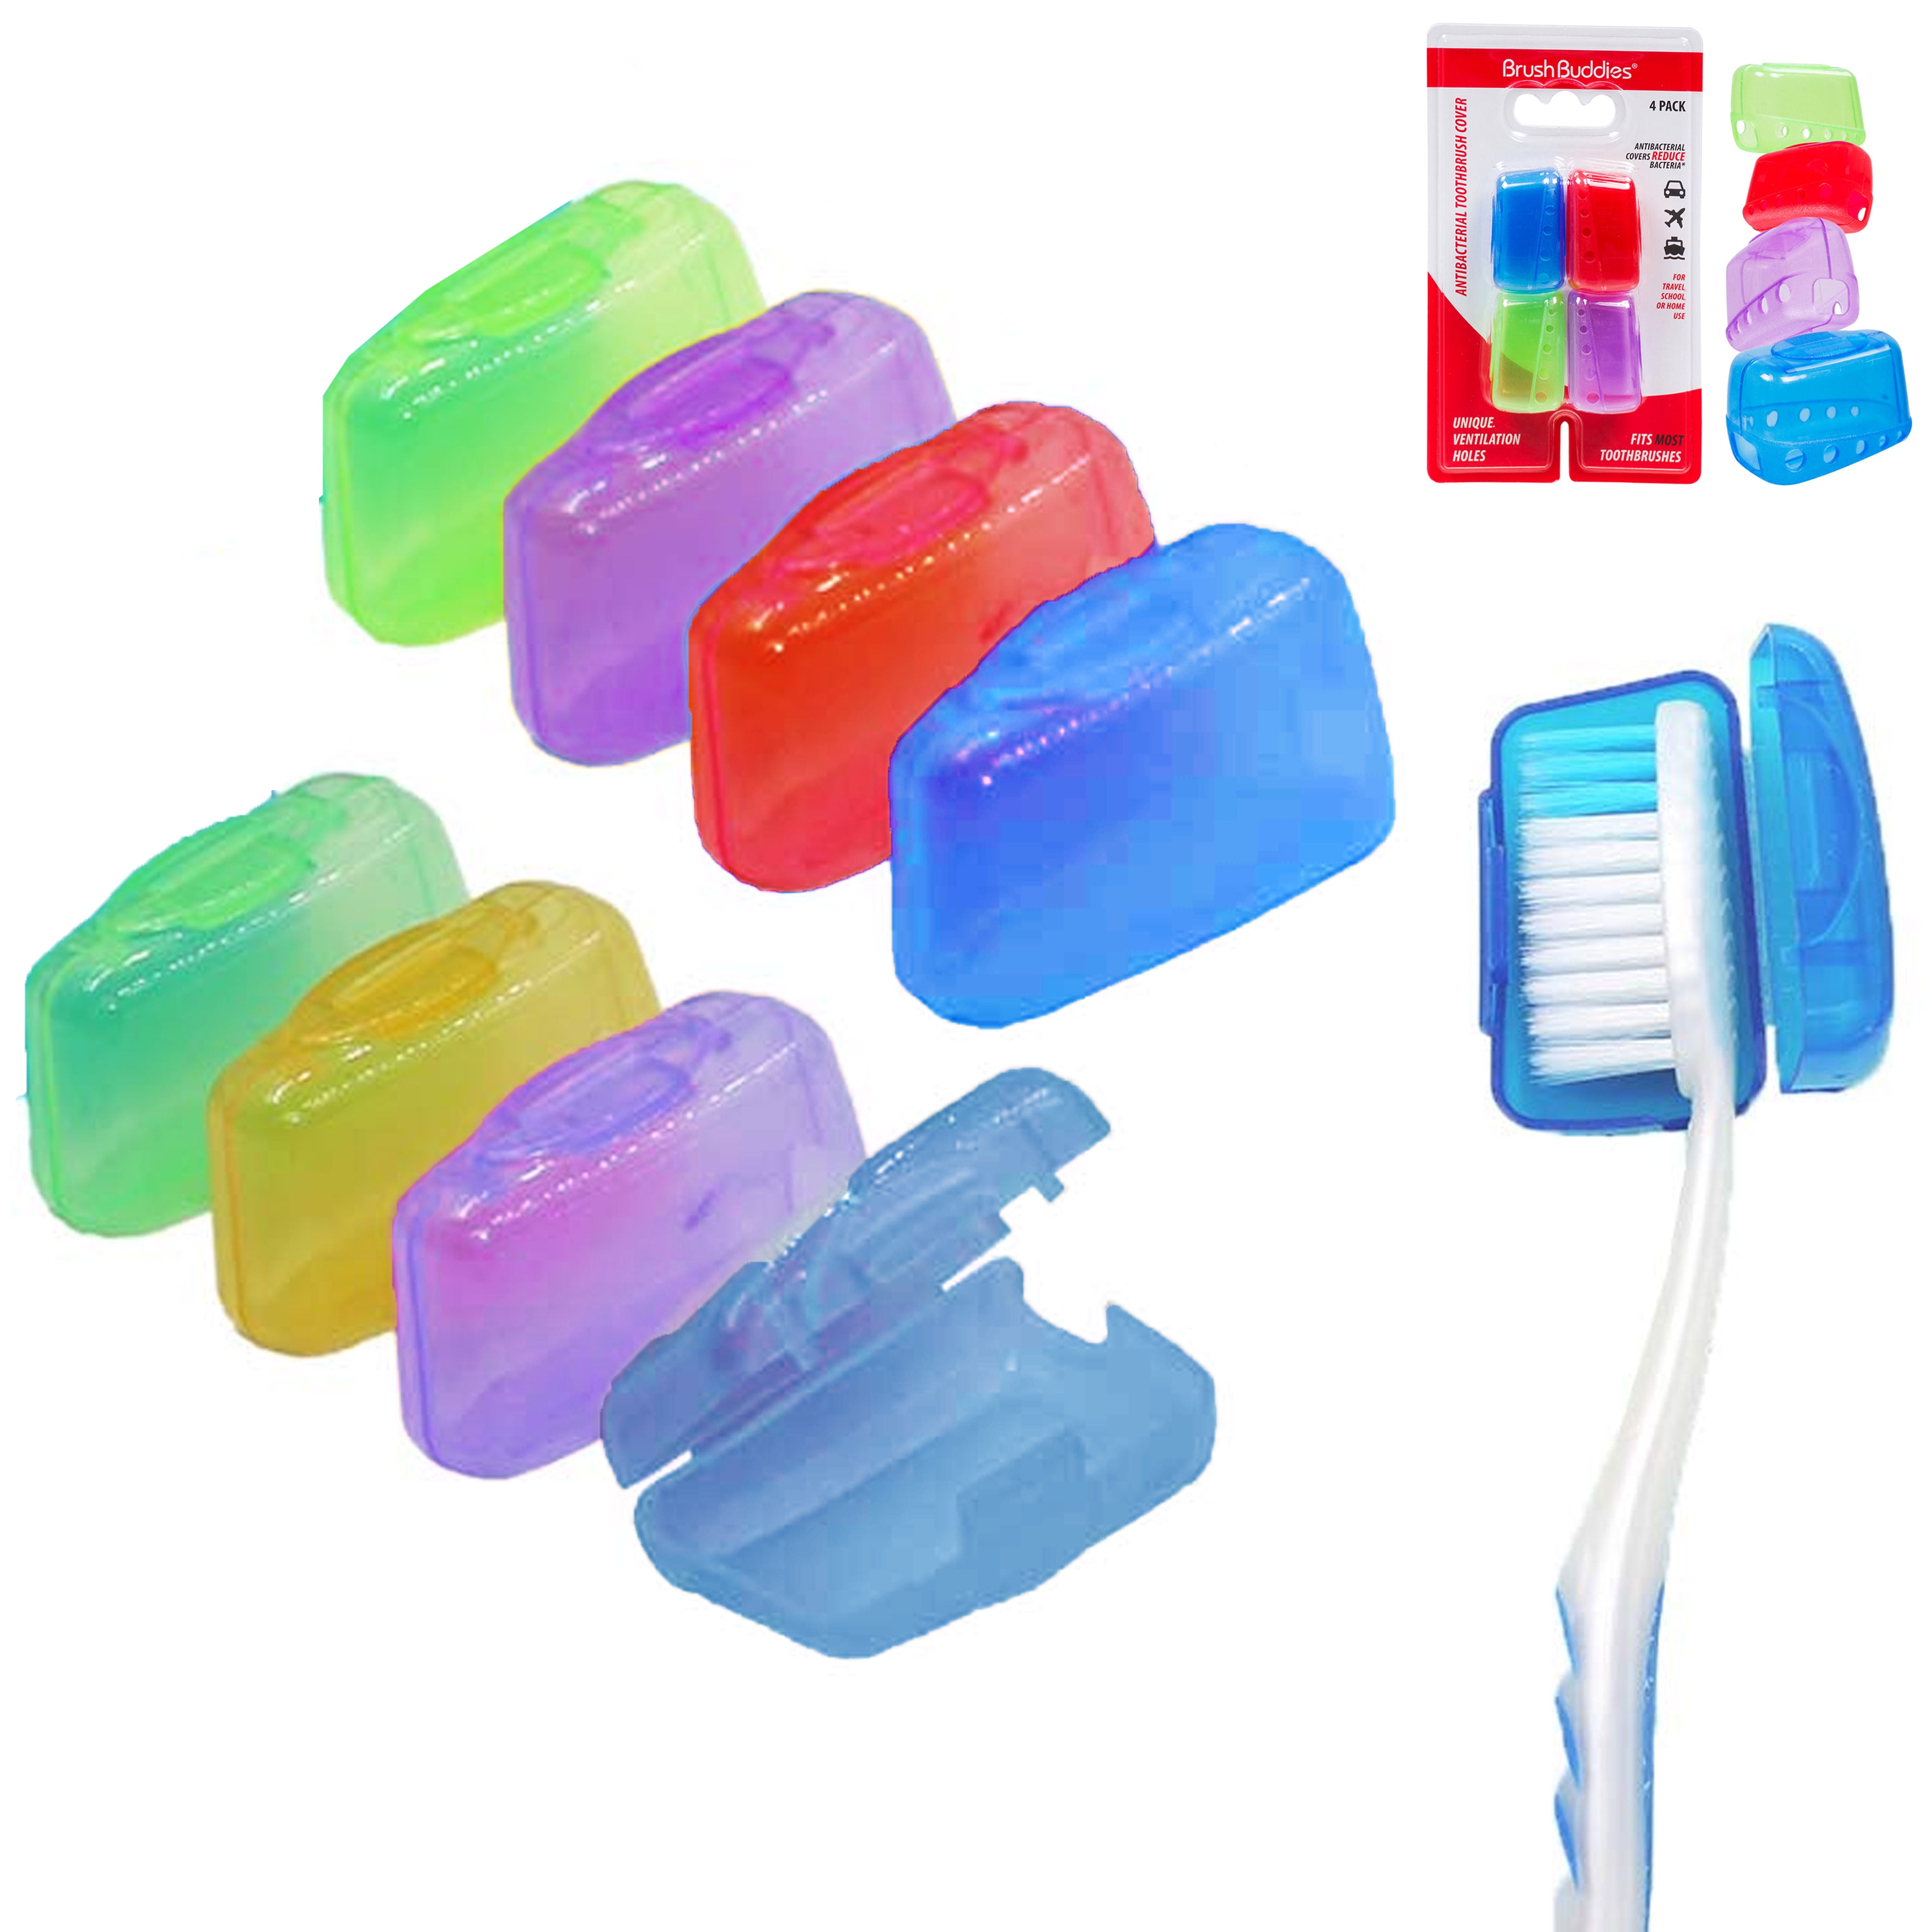 Protector Lot Of 4 for Travel & Camping NEW Tupperware TOOTHBRUSH Covers 